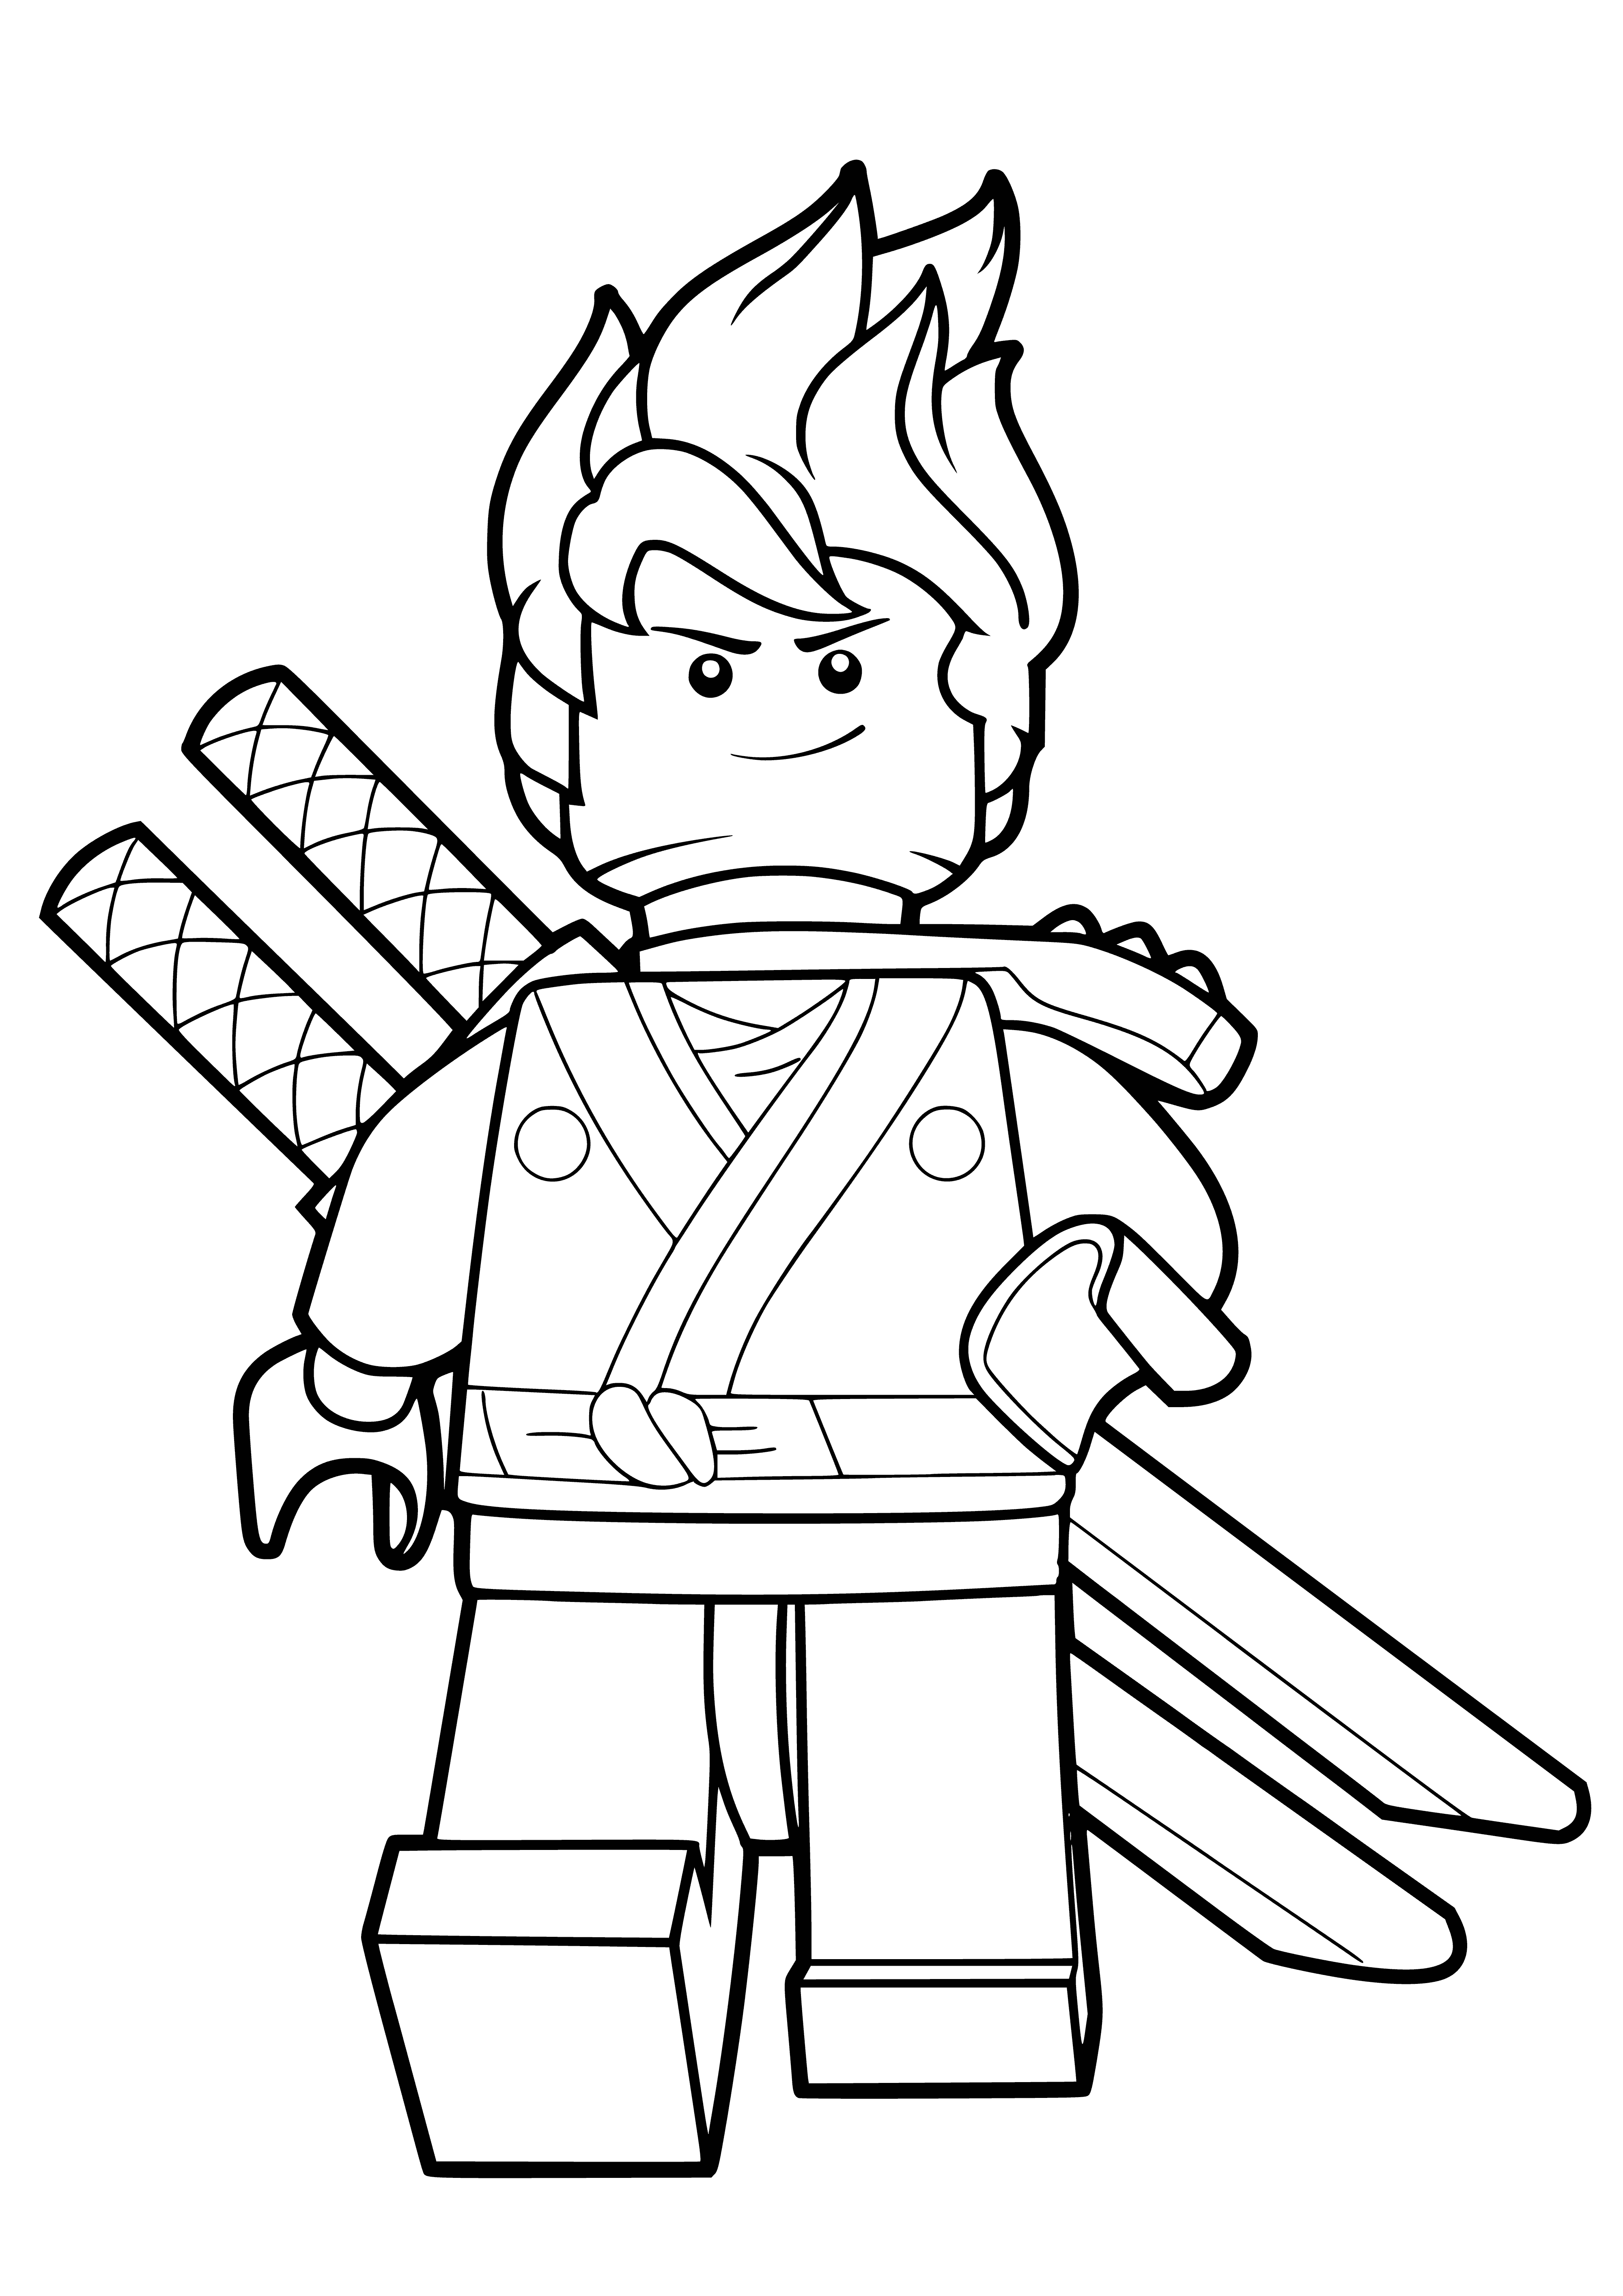 Where coloring page